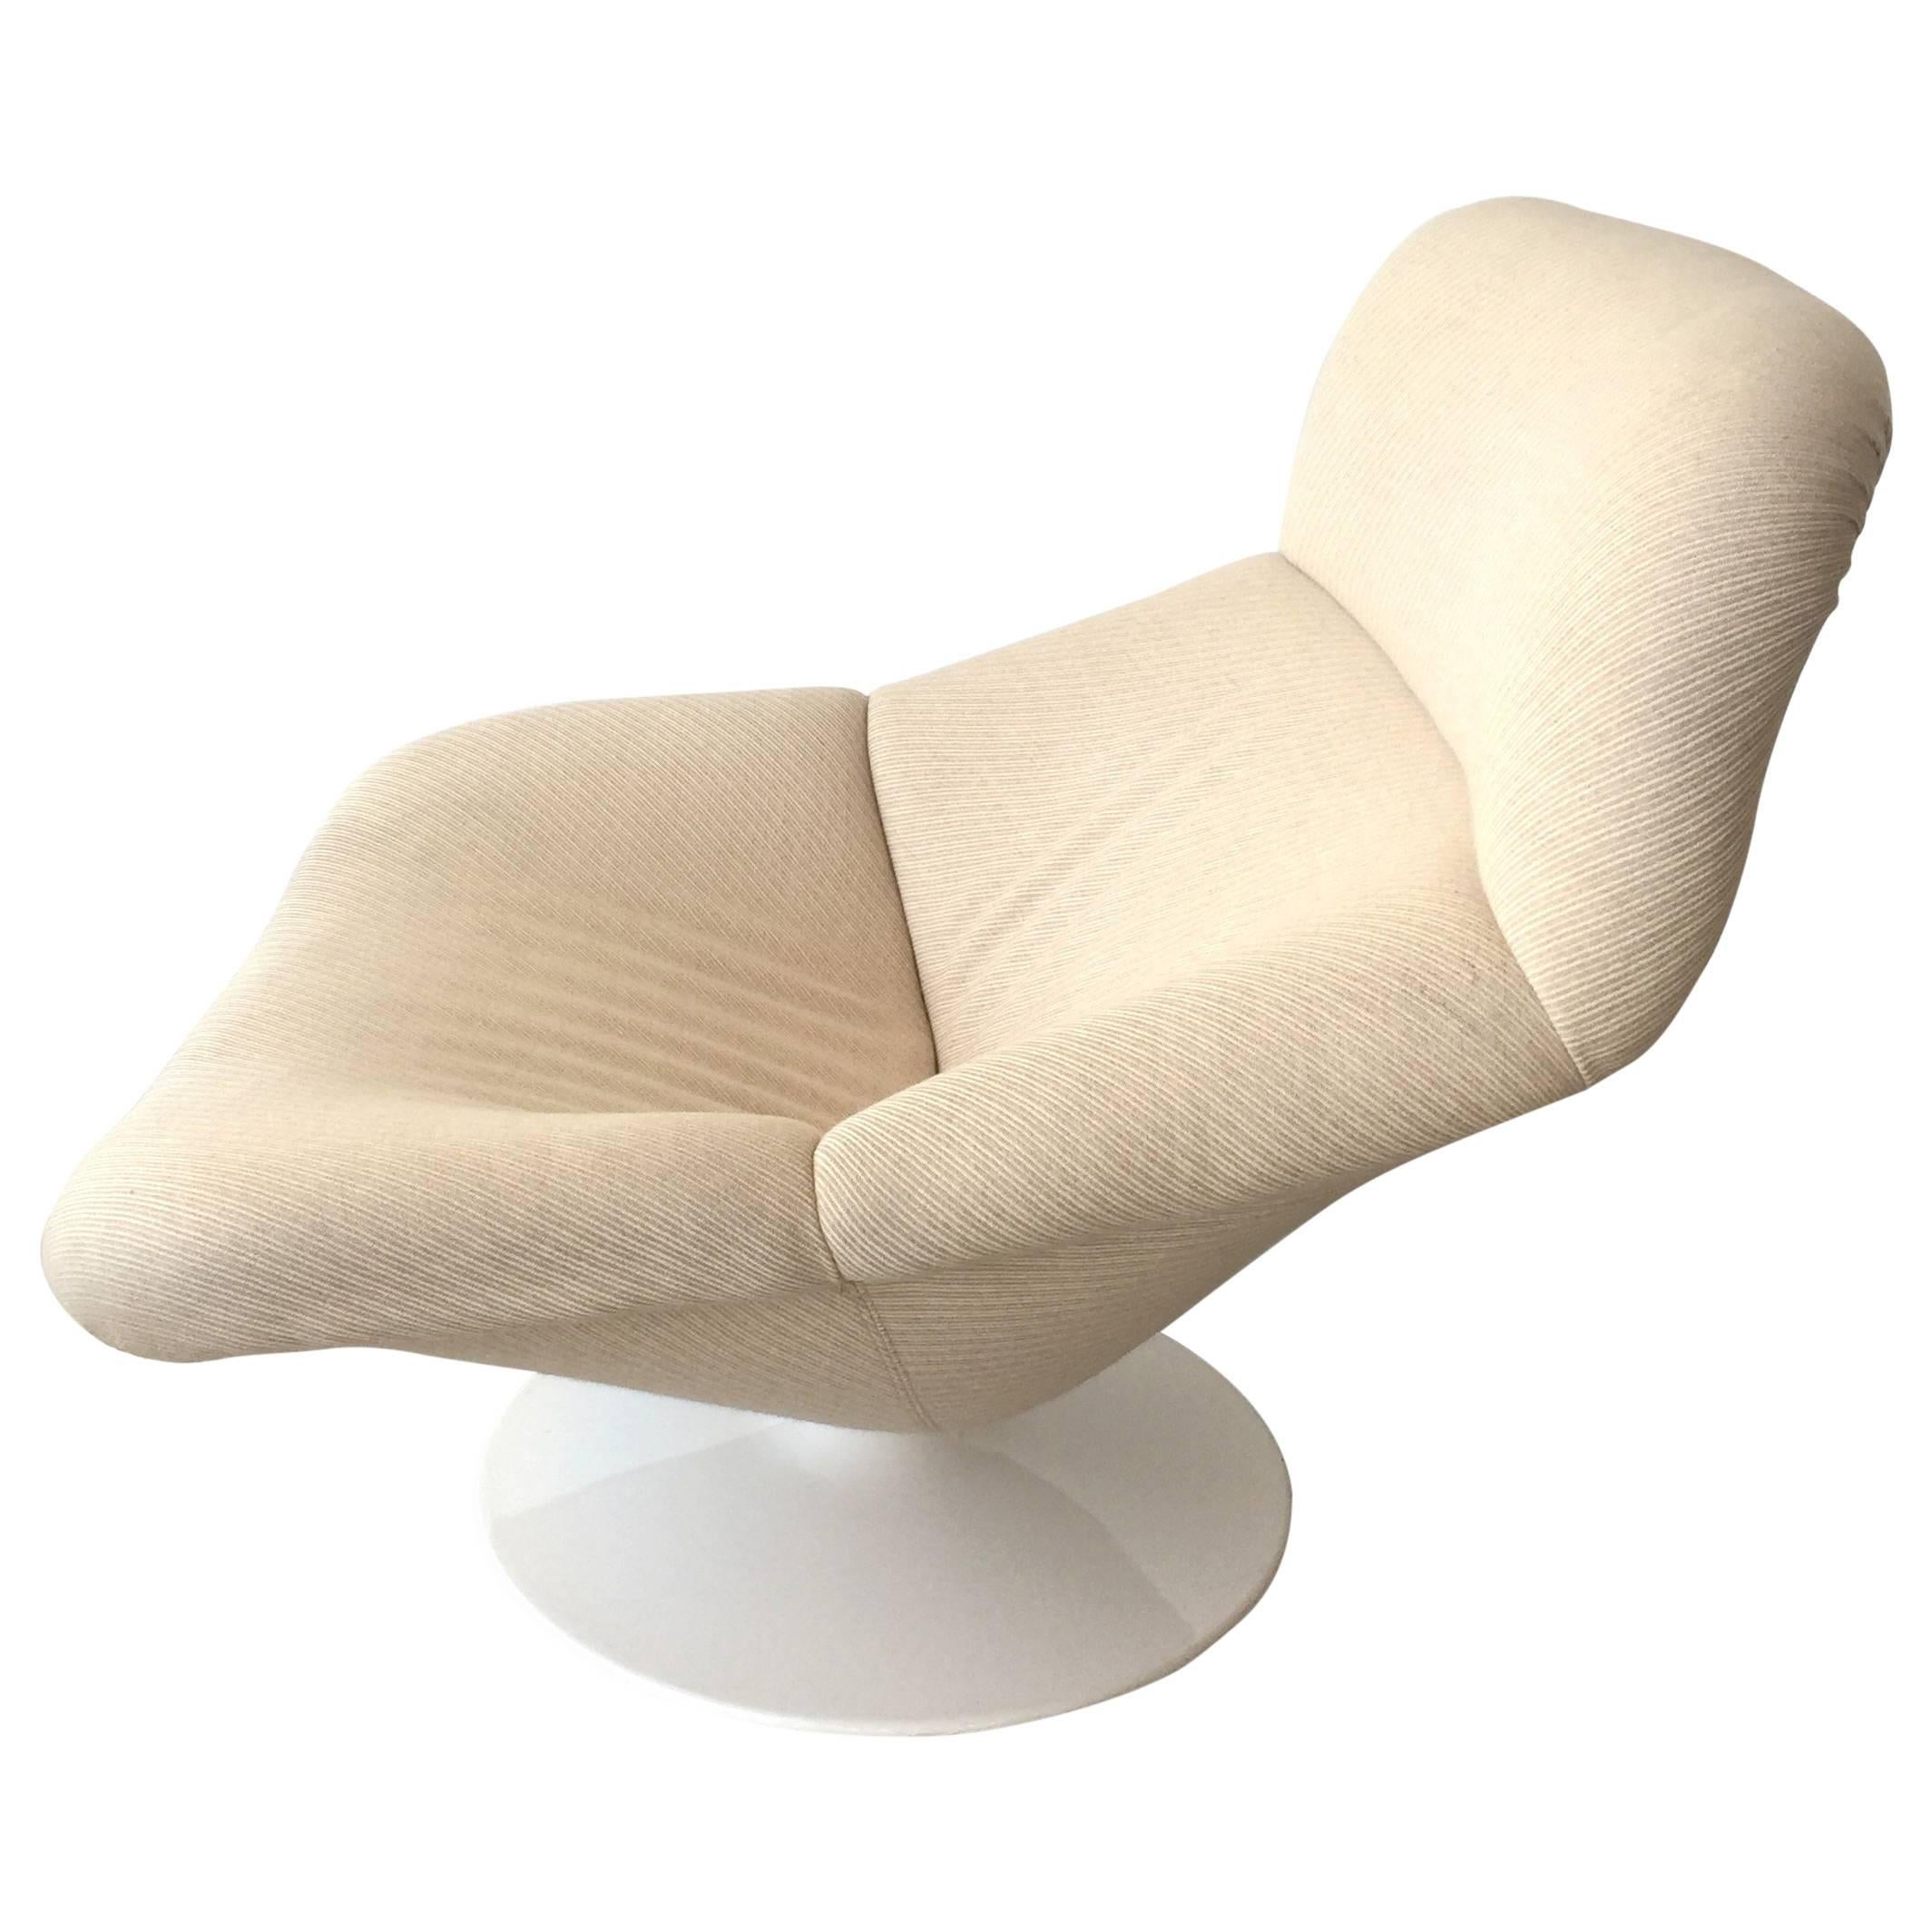 Gorgeous set of two vintage F519 swivel lounge chairs and one ottoman by Geoffrey Harcourt for Artifort. Cream colored woven wool upholstery. Classic round base. Extremely comfortable. Perfect for your retro home! 

Measurements listed below are